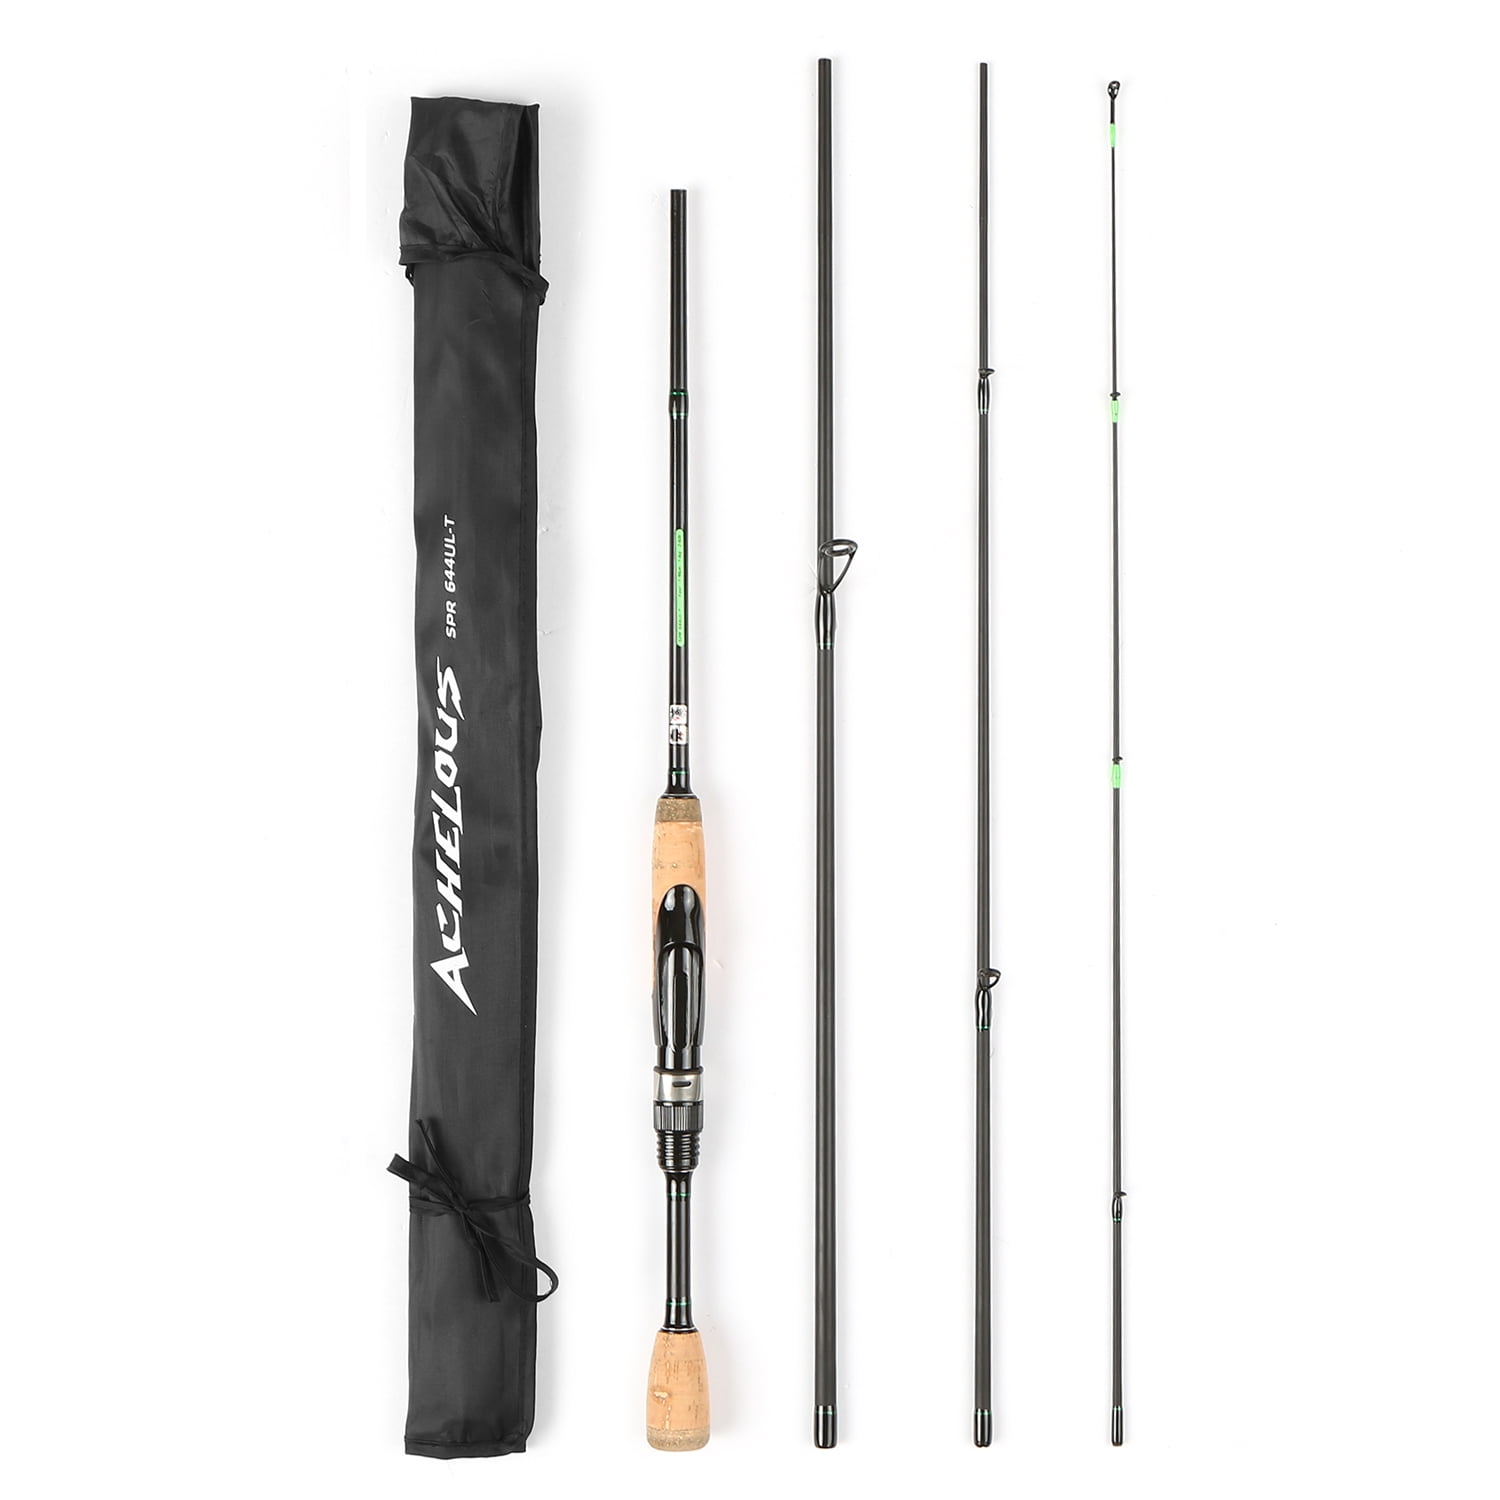 Portable Travel Spinning Fishing Rod Carbon Fiber 4 Pieces Fishing Pole 